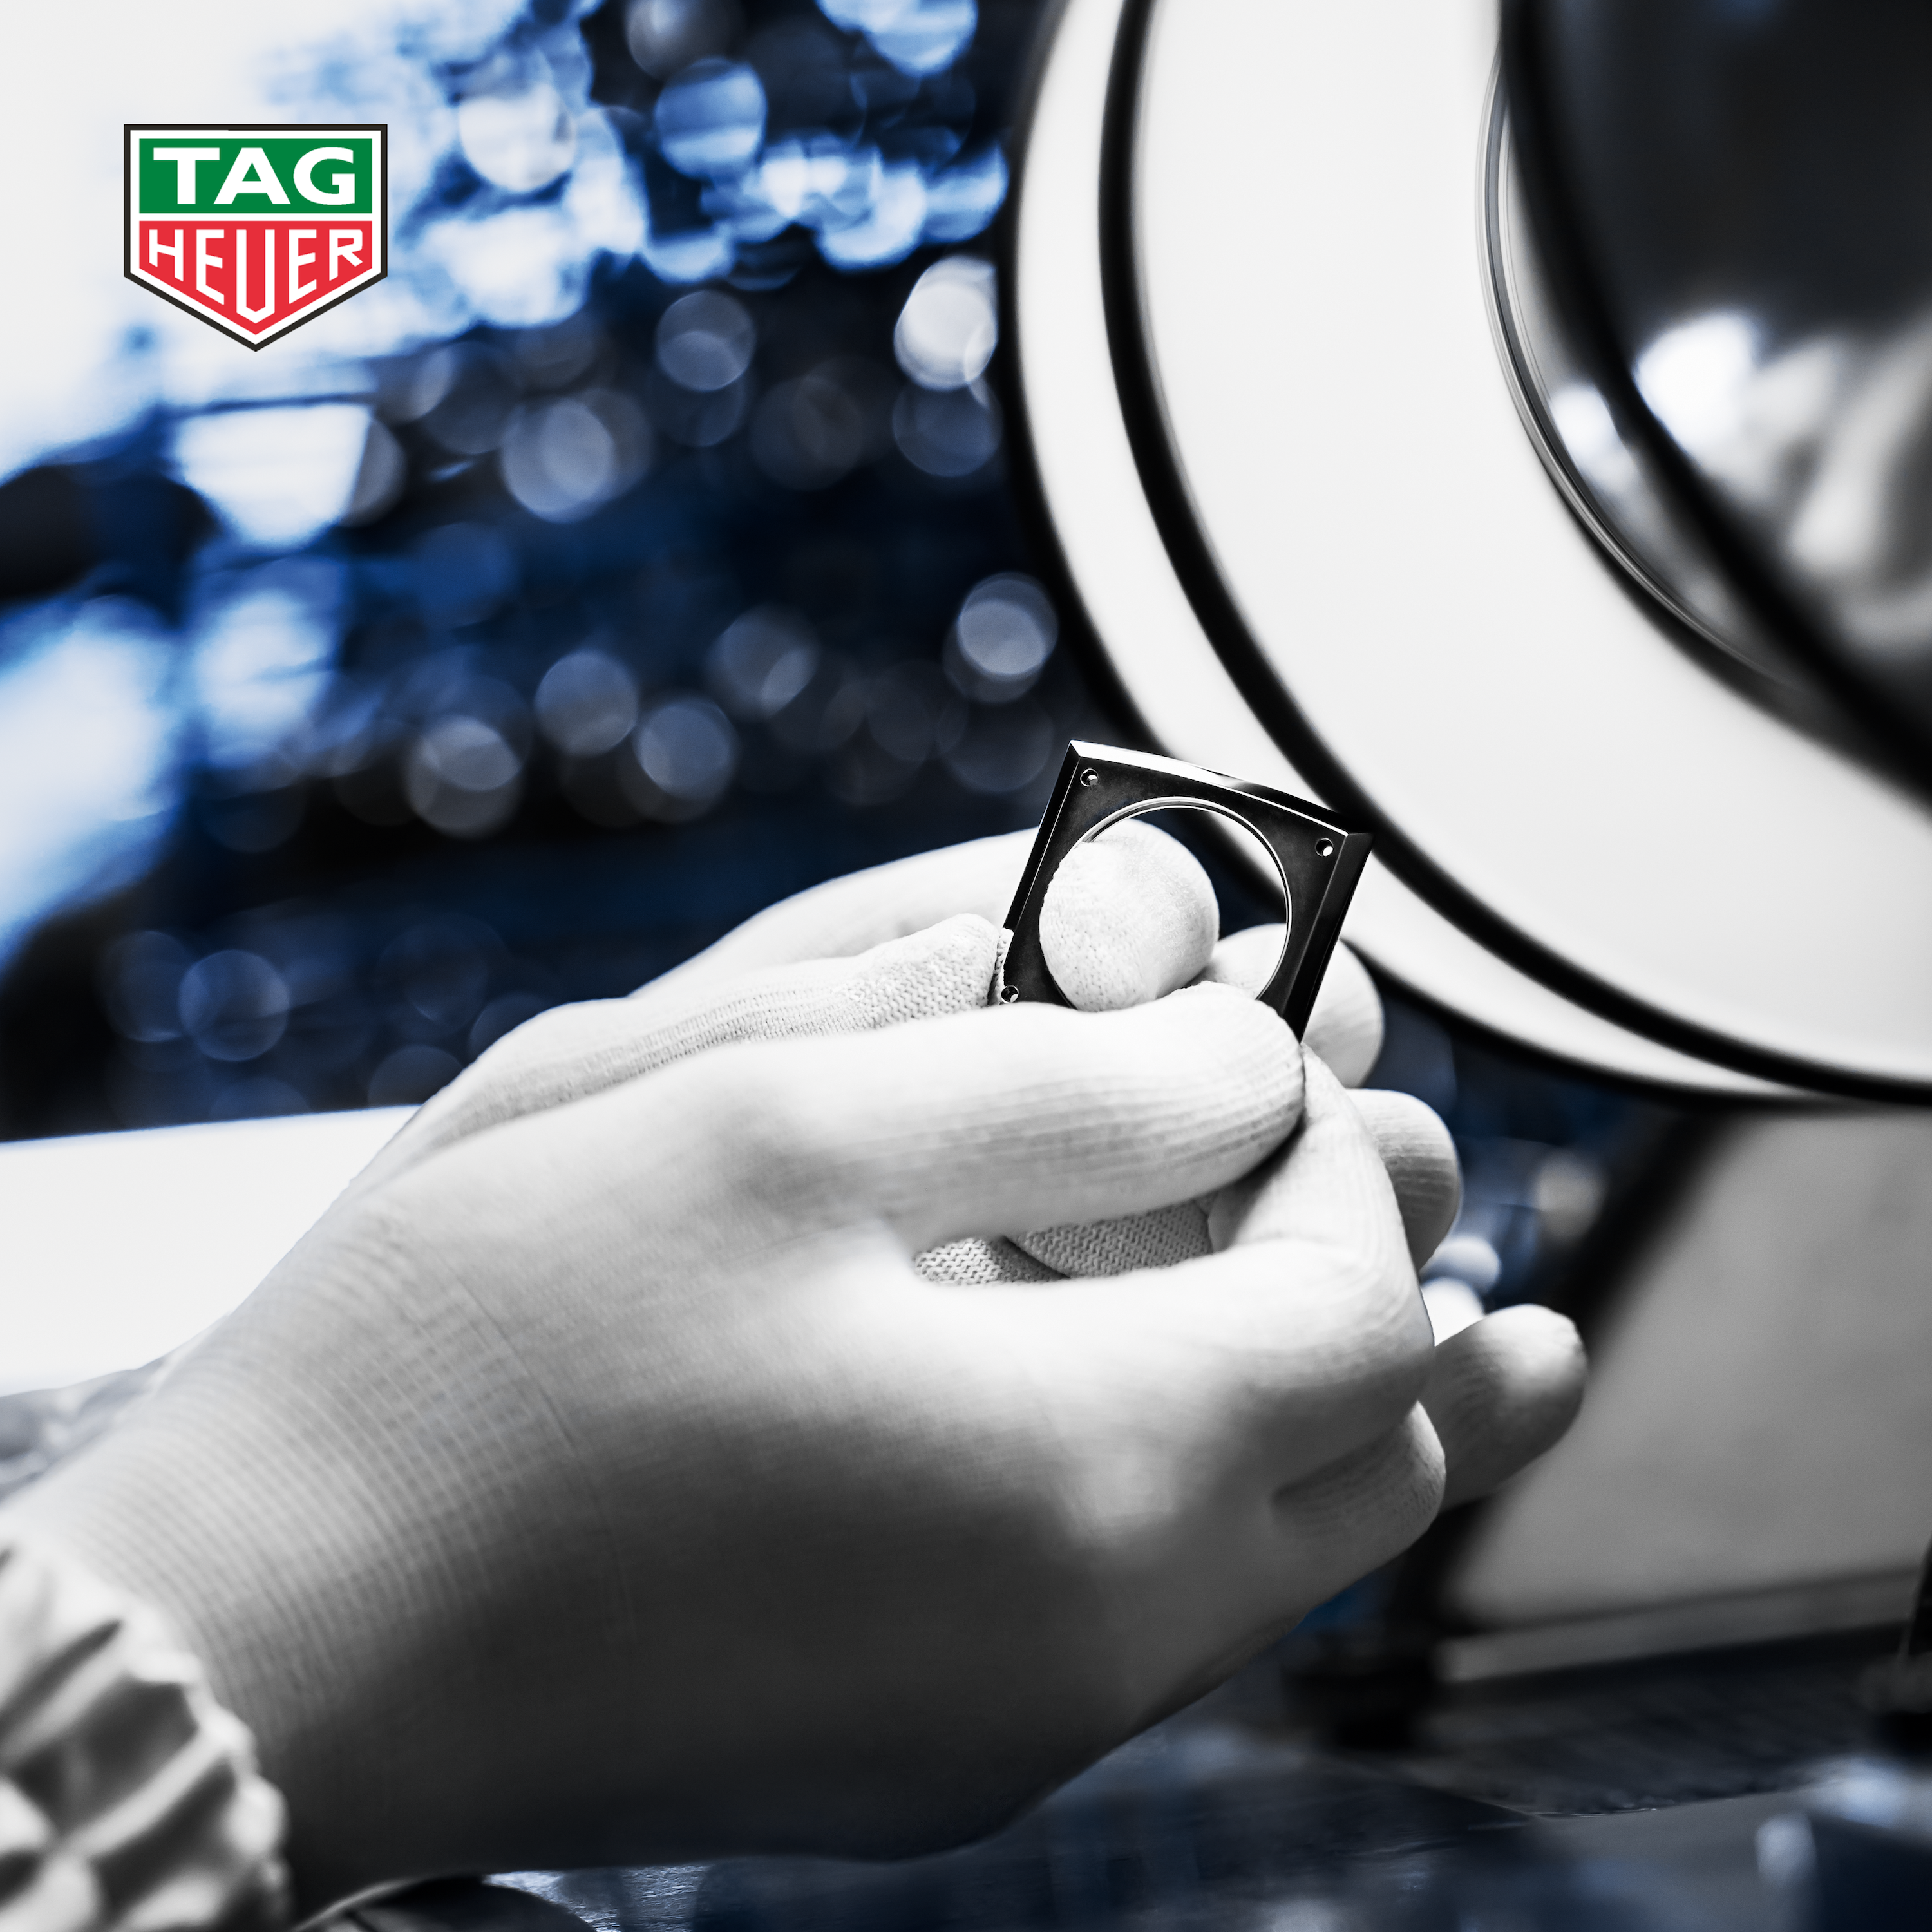 Part 3 - How a TAG Heuer case is made